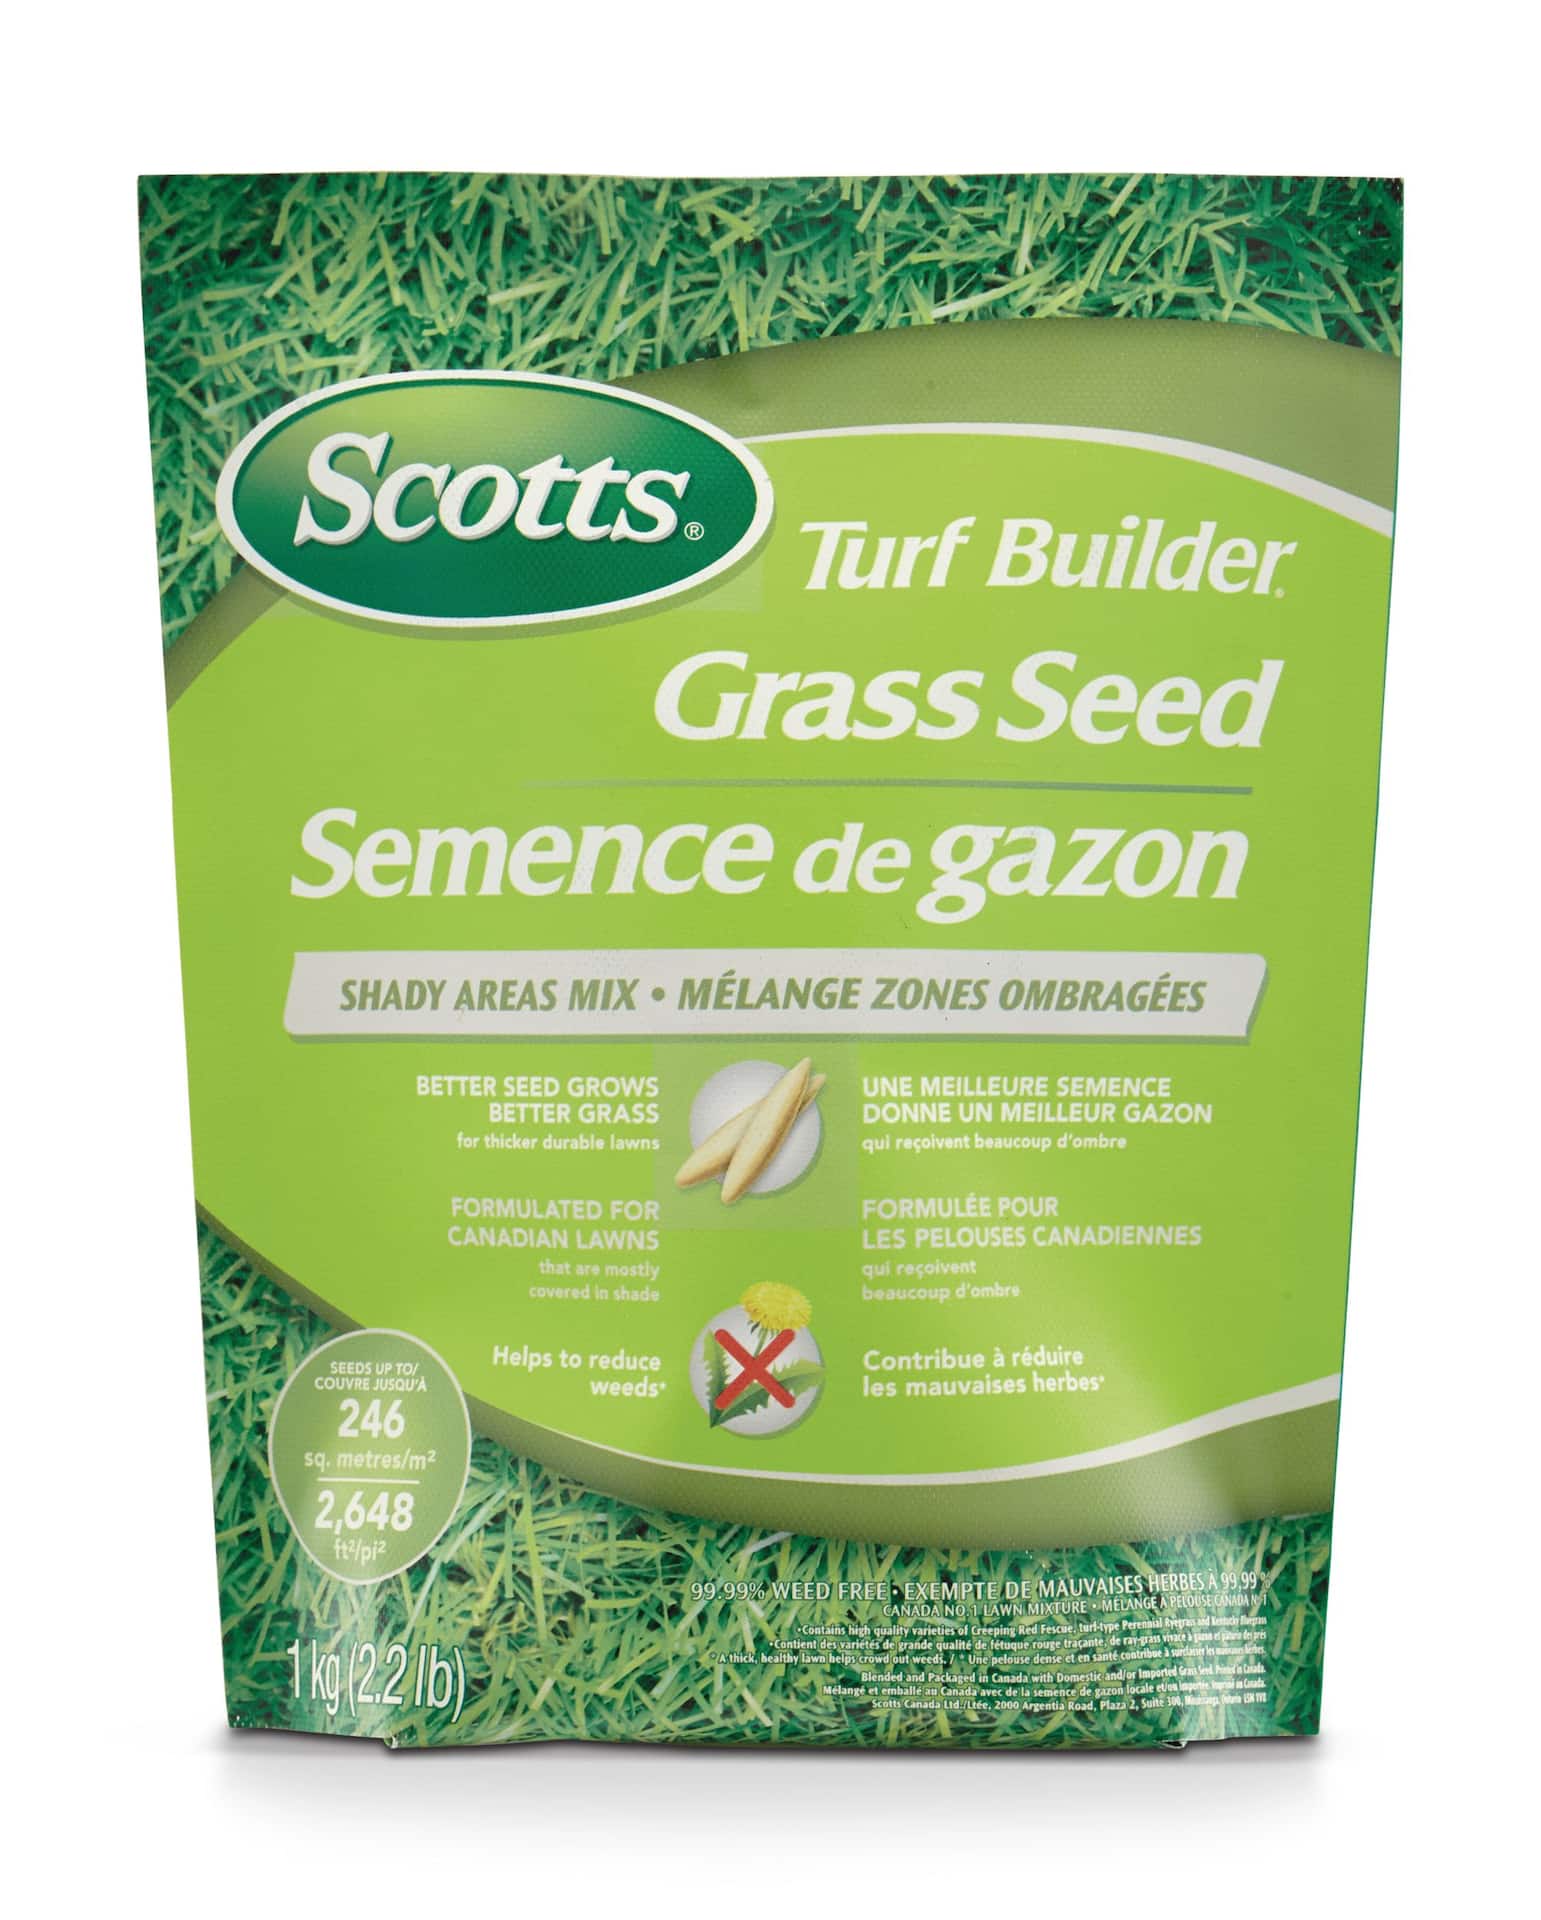 Scotts Turf Builder Shade Grass Seed For Thick Durable Lawns, 1-kg